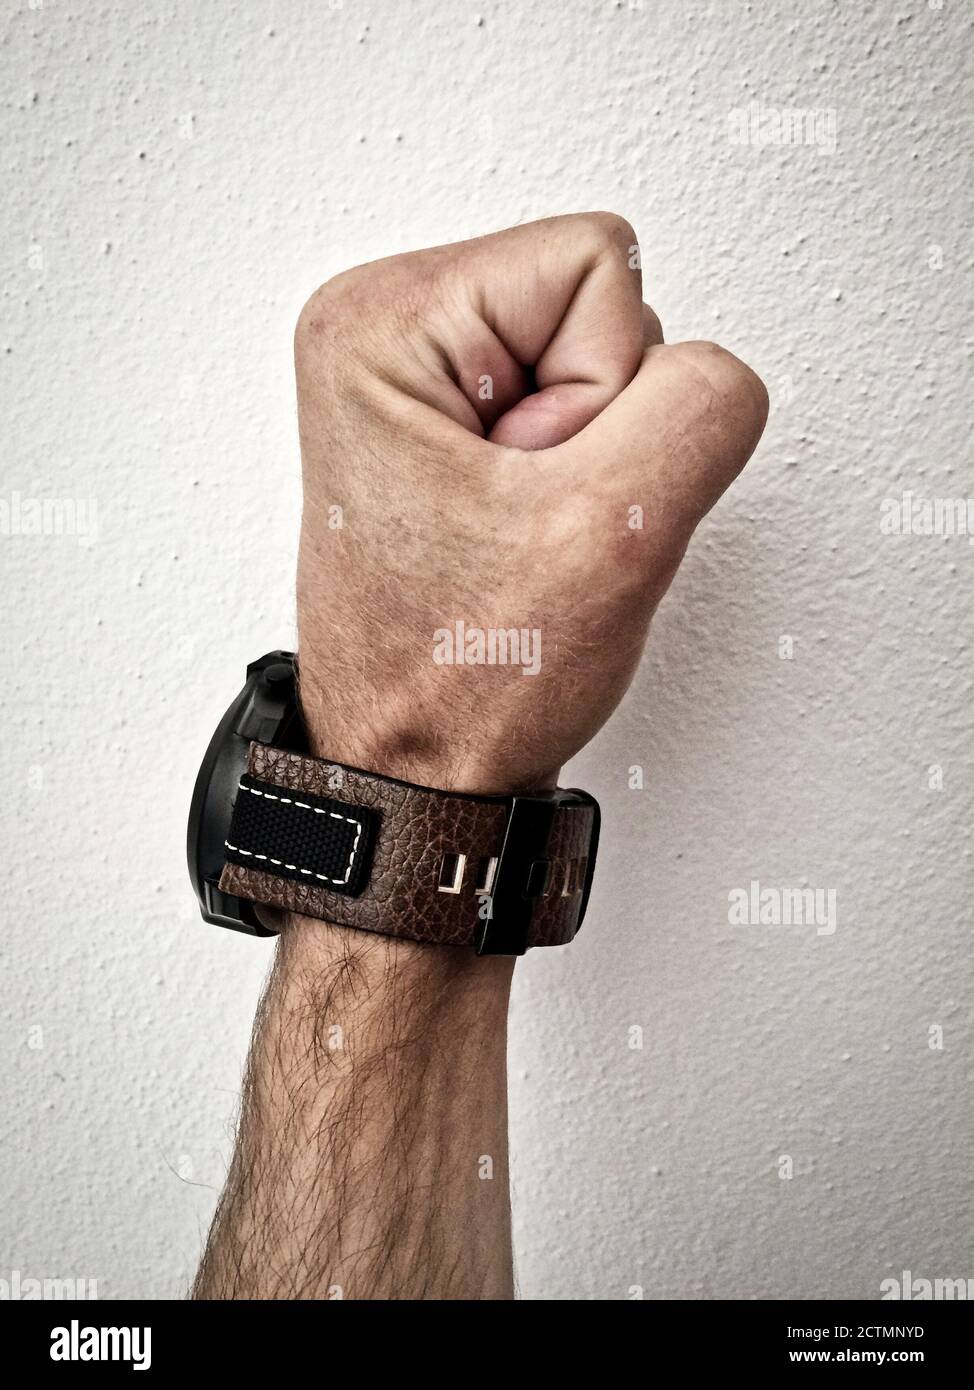 big watch on a white man's hand, make a fist, watch on the arm, part of the body, white skin, white background, pounding, hair on the arm, part of the Stock Photo